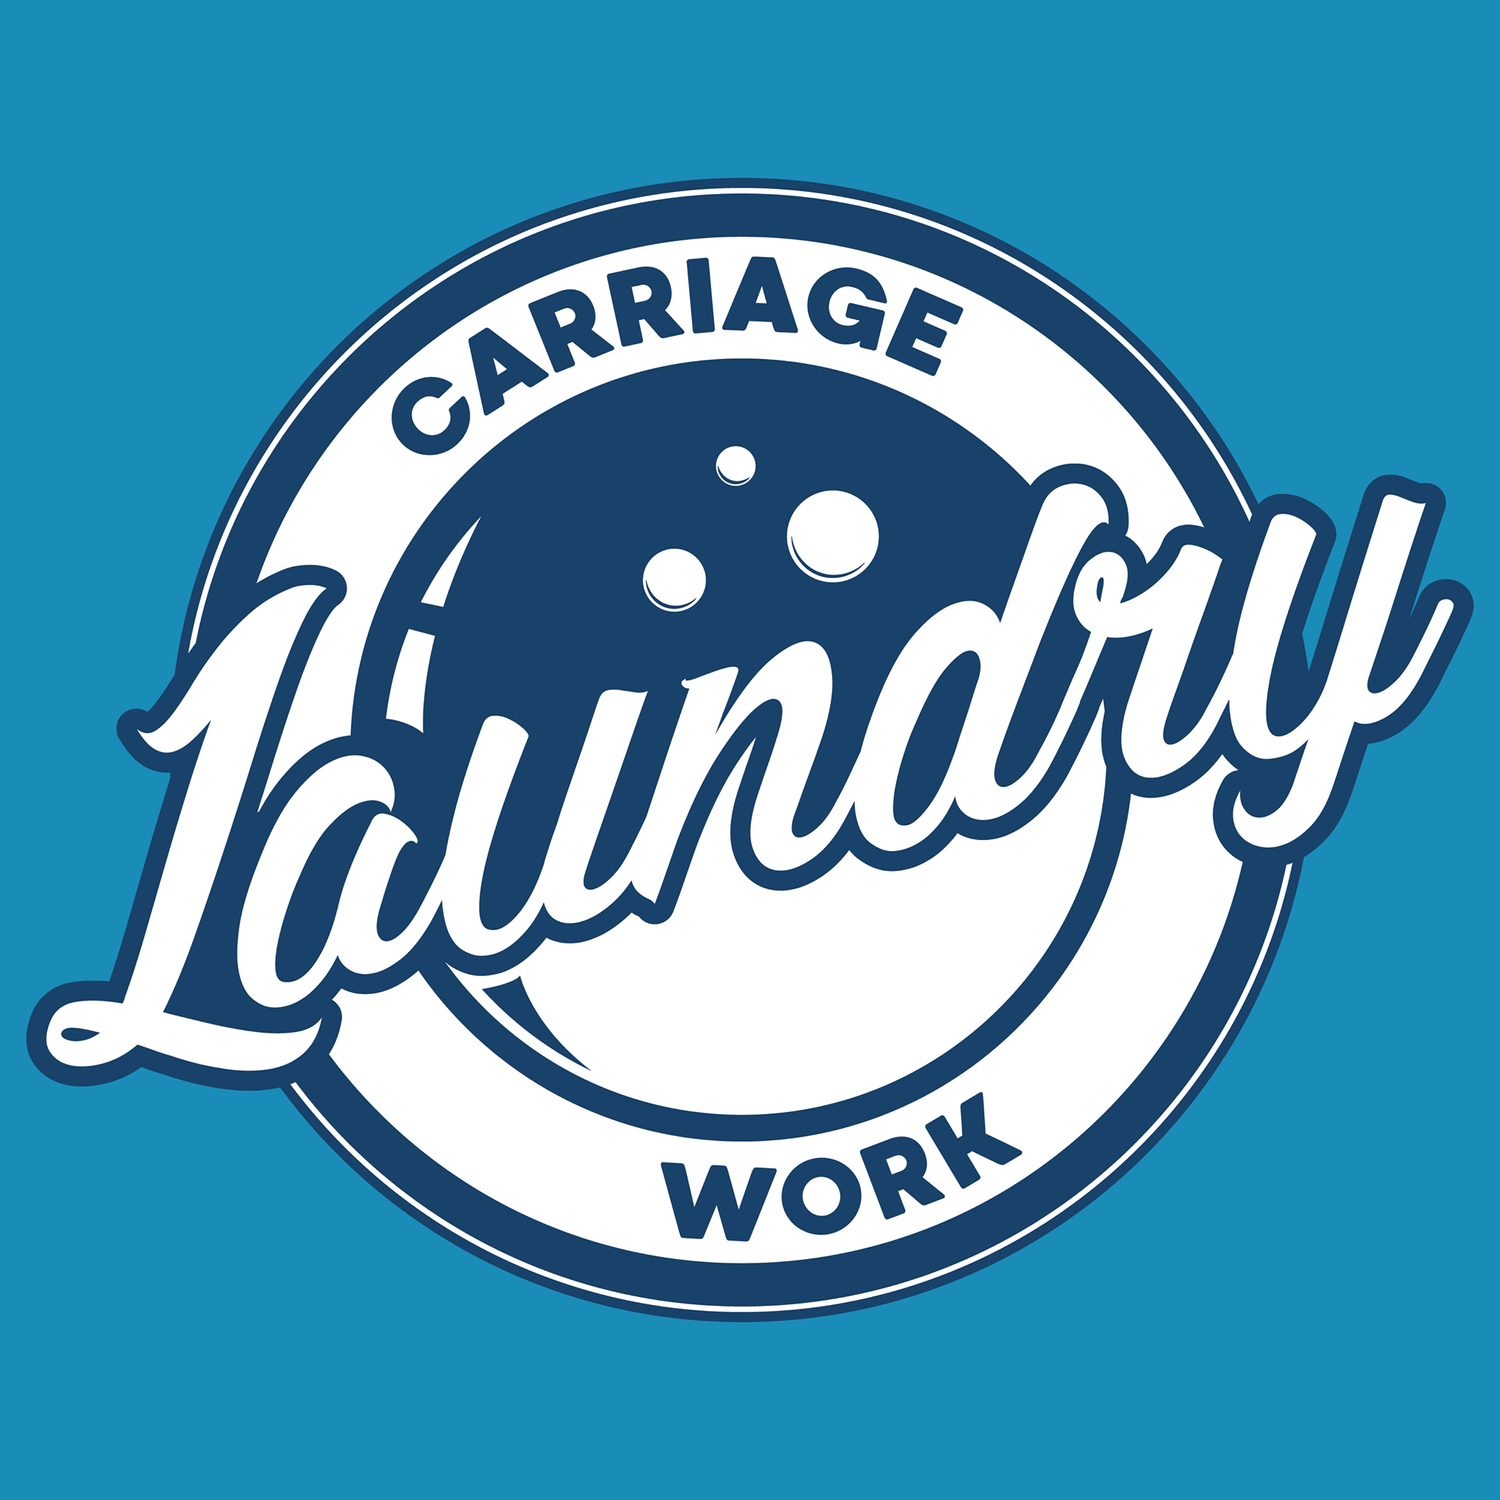 Carriage Work Laundry